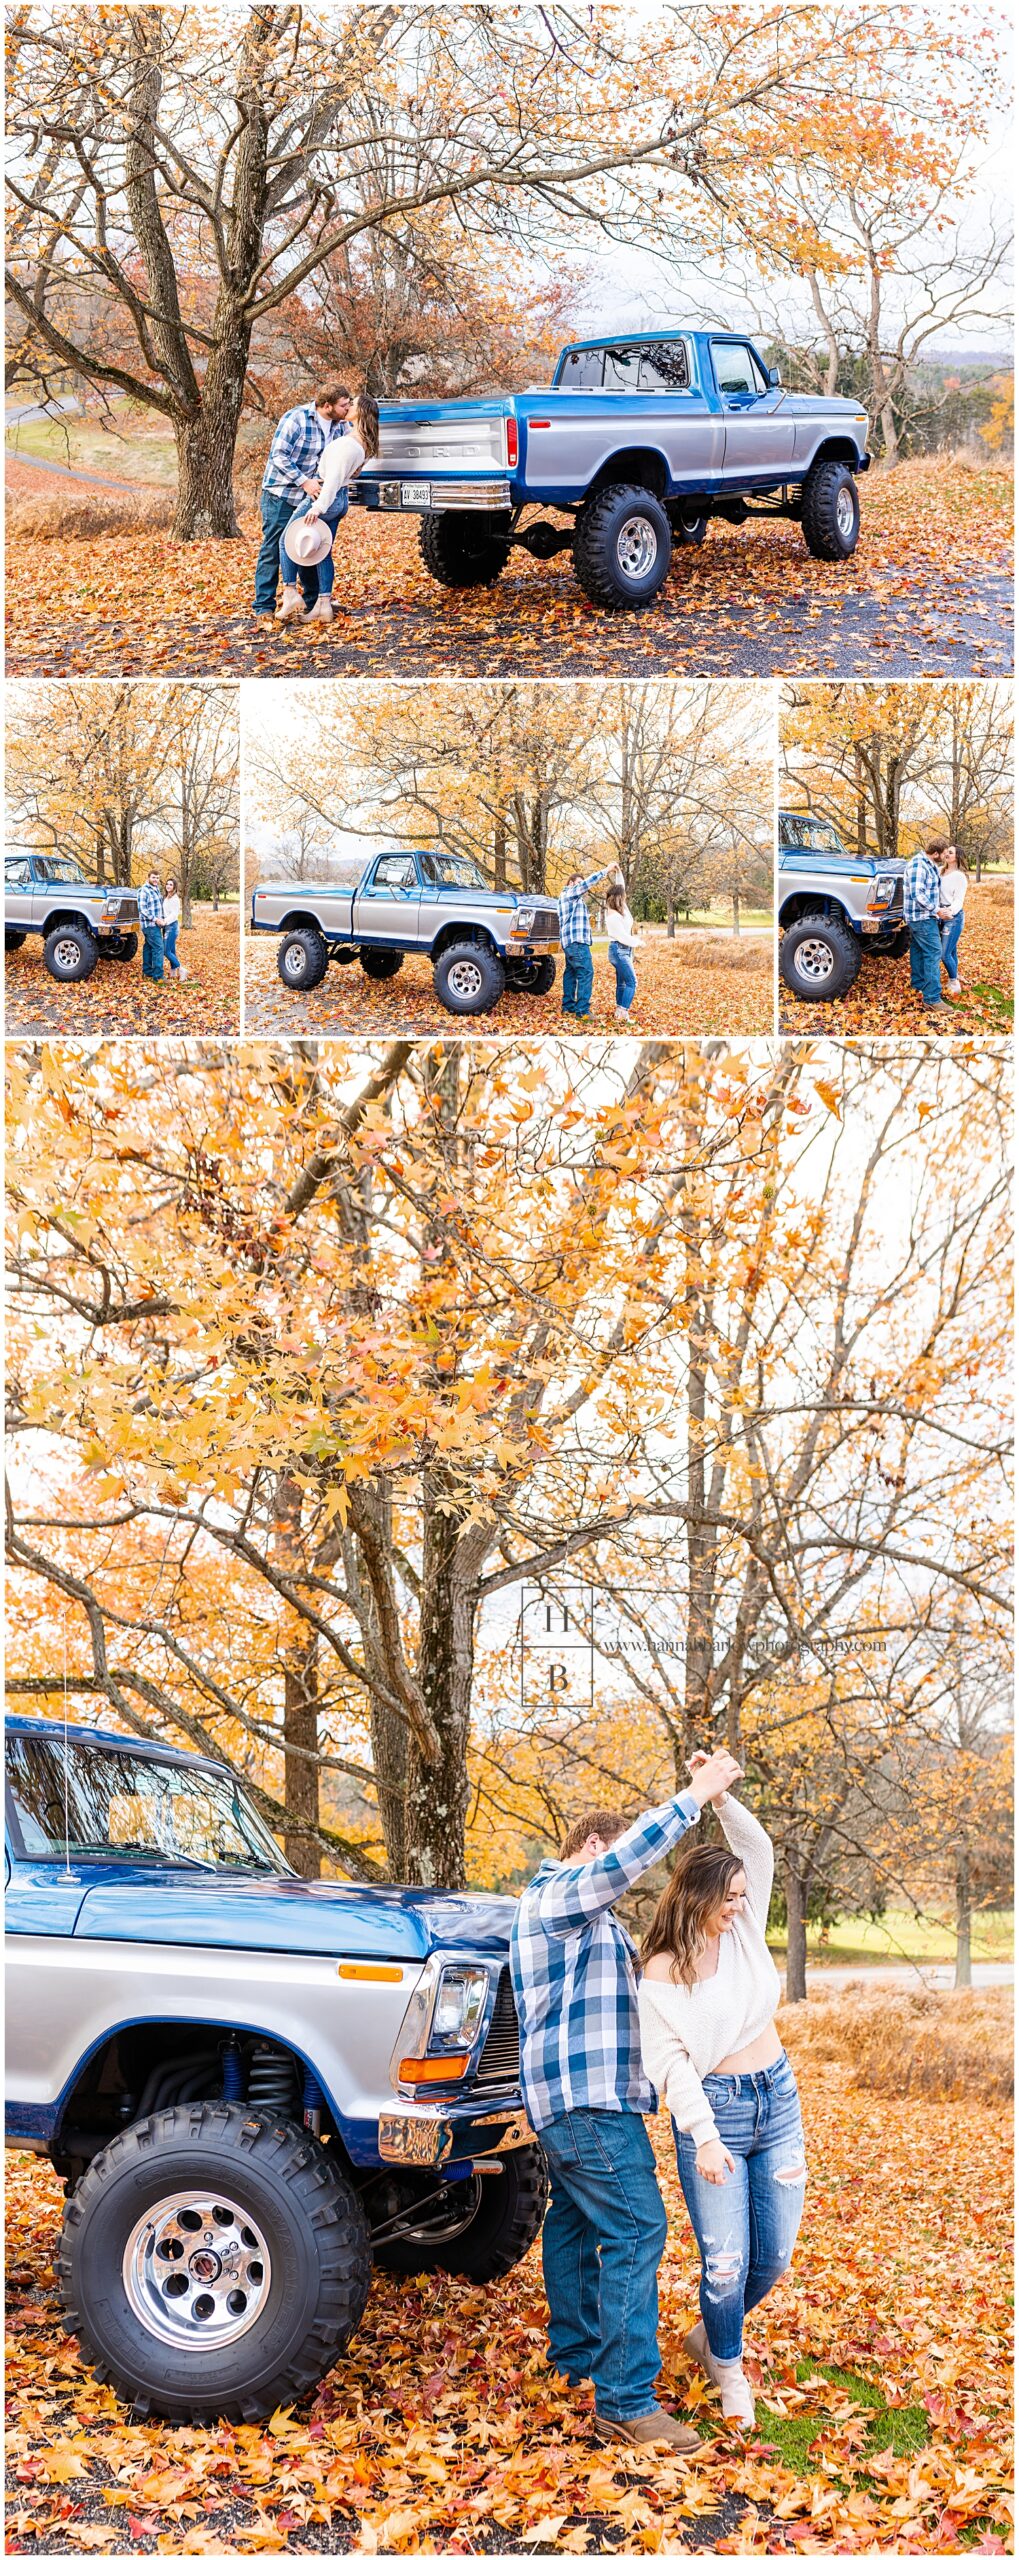 Couple poses by old restored truck for engagement photos